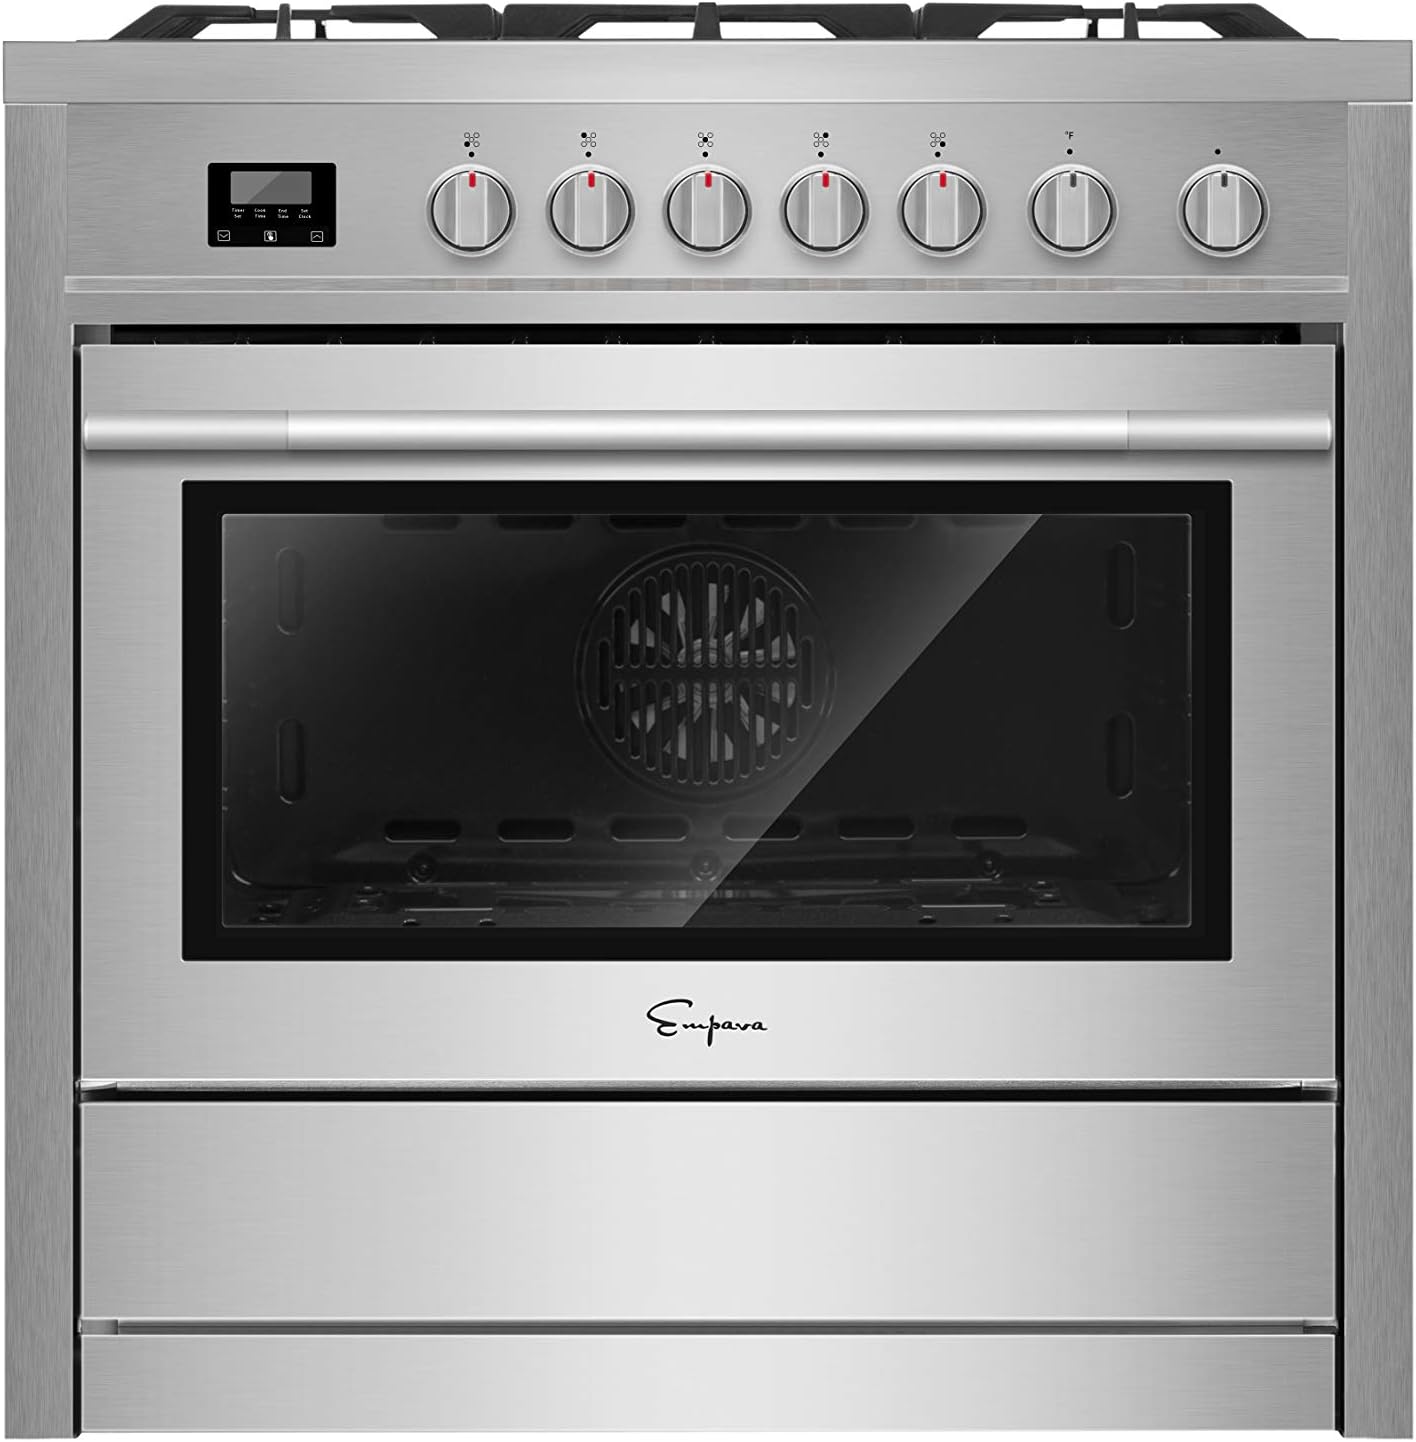 Empava 36 in. Slide-In Gas Range with Convection Oven [...]